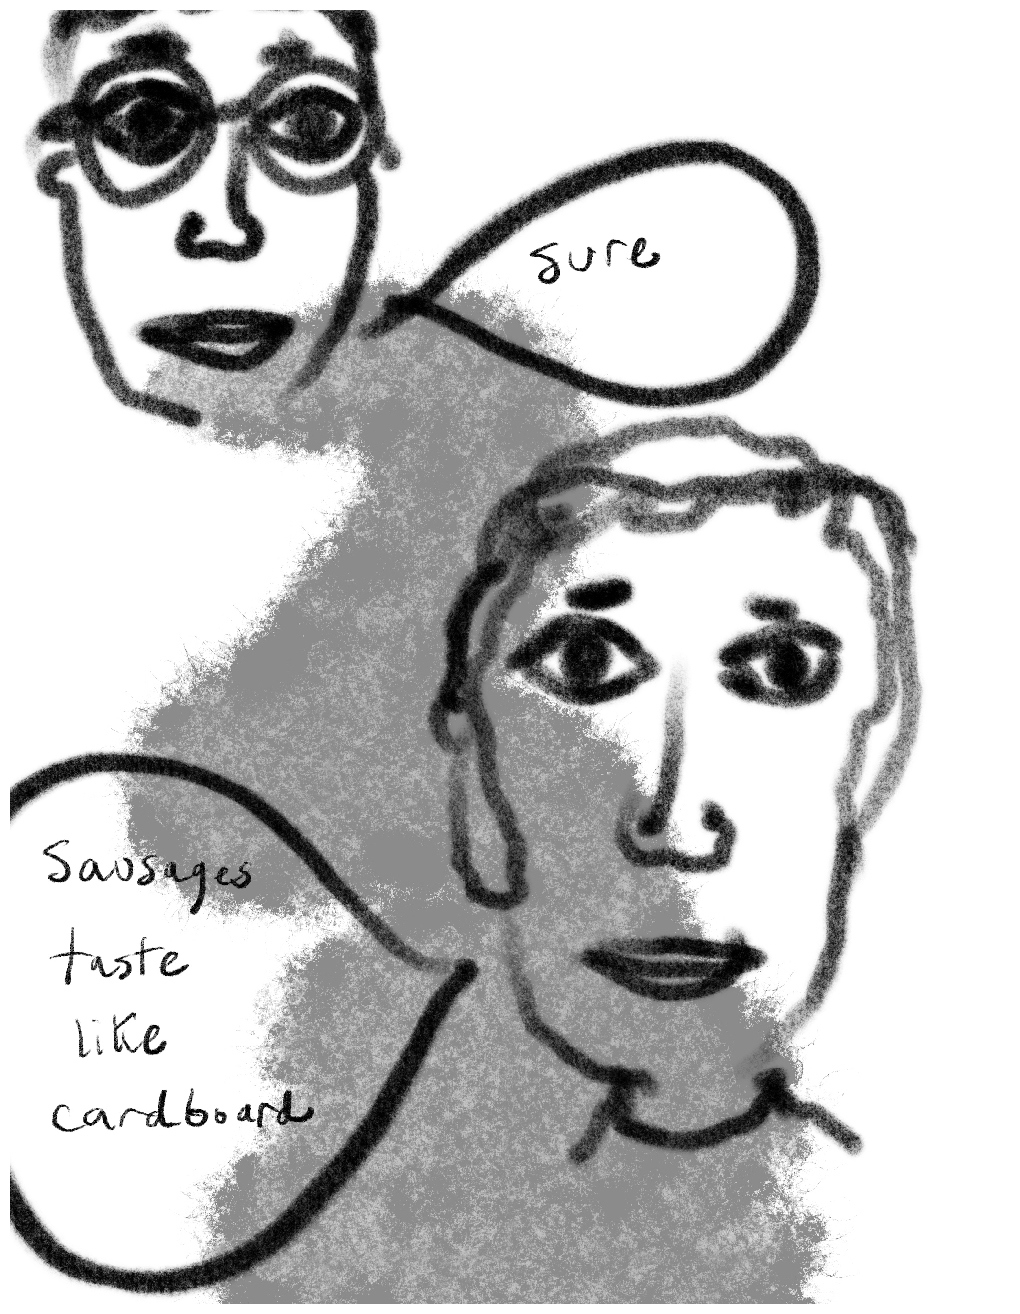 Panel two of a four-panel comic called 'A shared experience', consisting of thick black line drawing and hand written text against a grey and white background. The head of a young man with large eyes and glasses floats in the top left corner of the panel. In the lower two thirds of the panel are the head and shoulders of the young man from panel one. Both are looking out at the viewer and have speech bubbles coming from them. The figure with glasses says "sure". The other says "Sausages taste like cardboard."